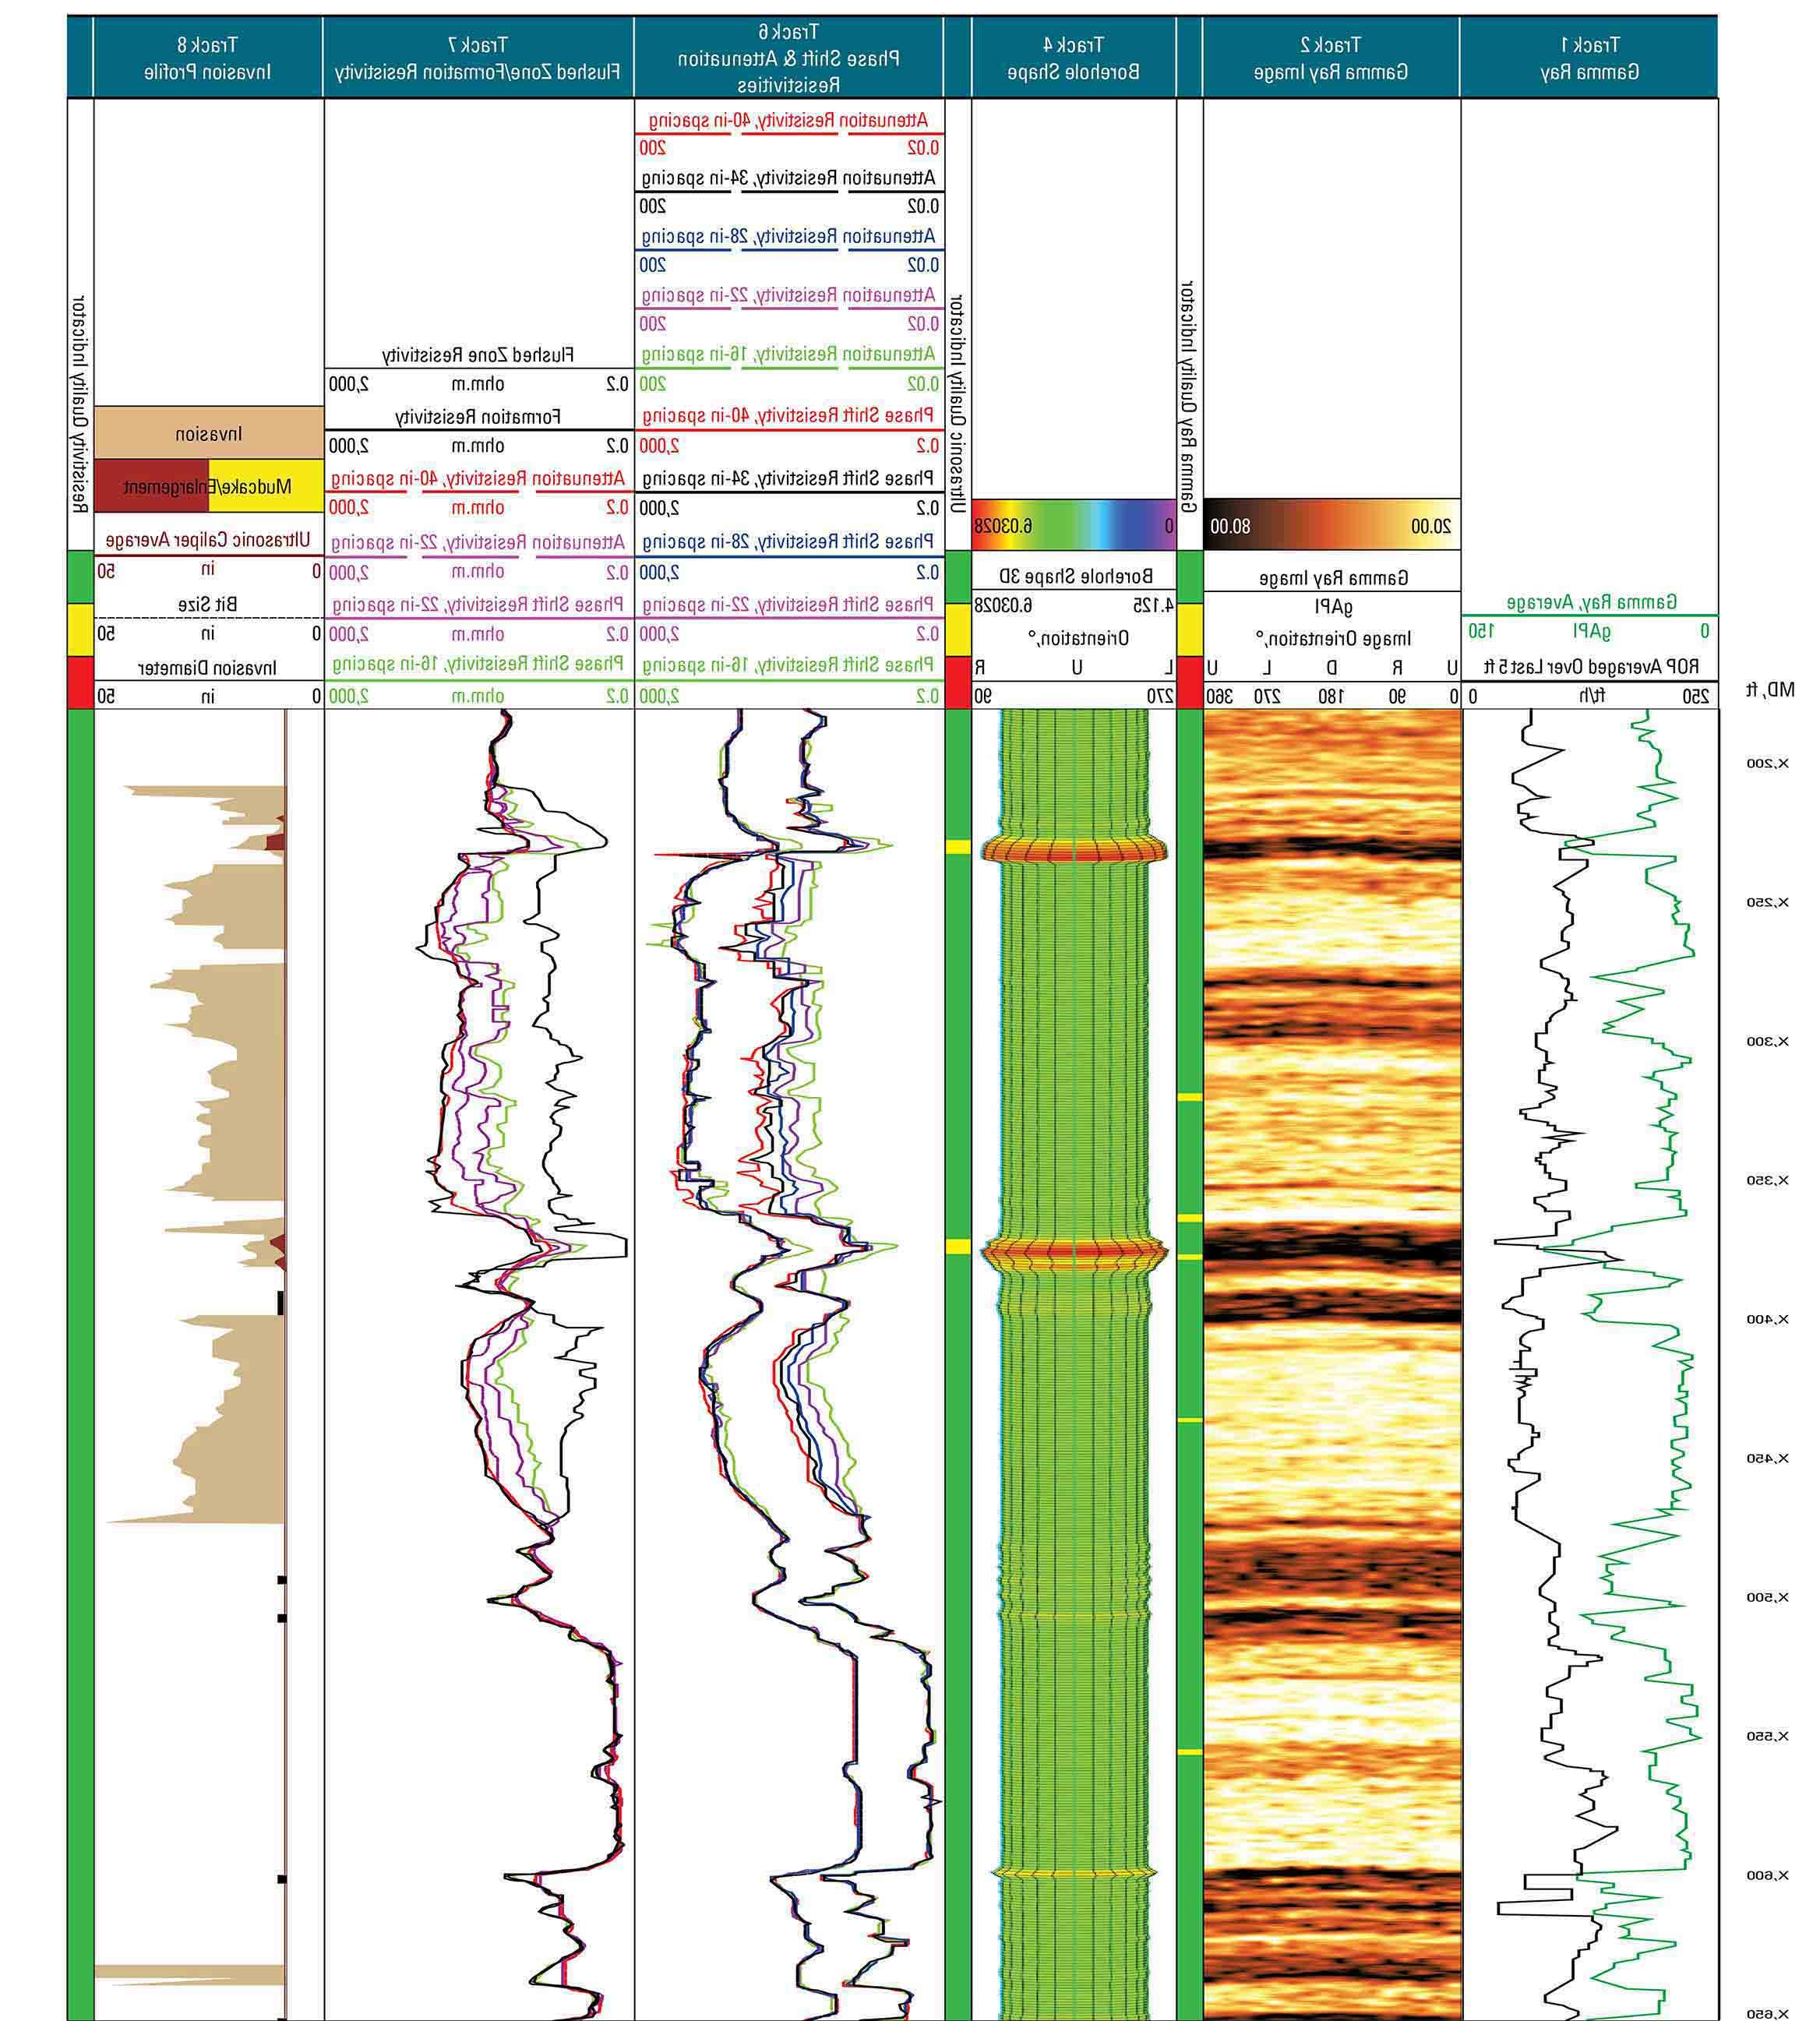 A log from the NeoScope service showing various gamma ray, borehole shape, resistivity, and invasion profile tracks